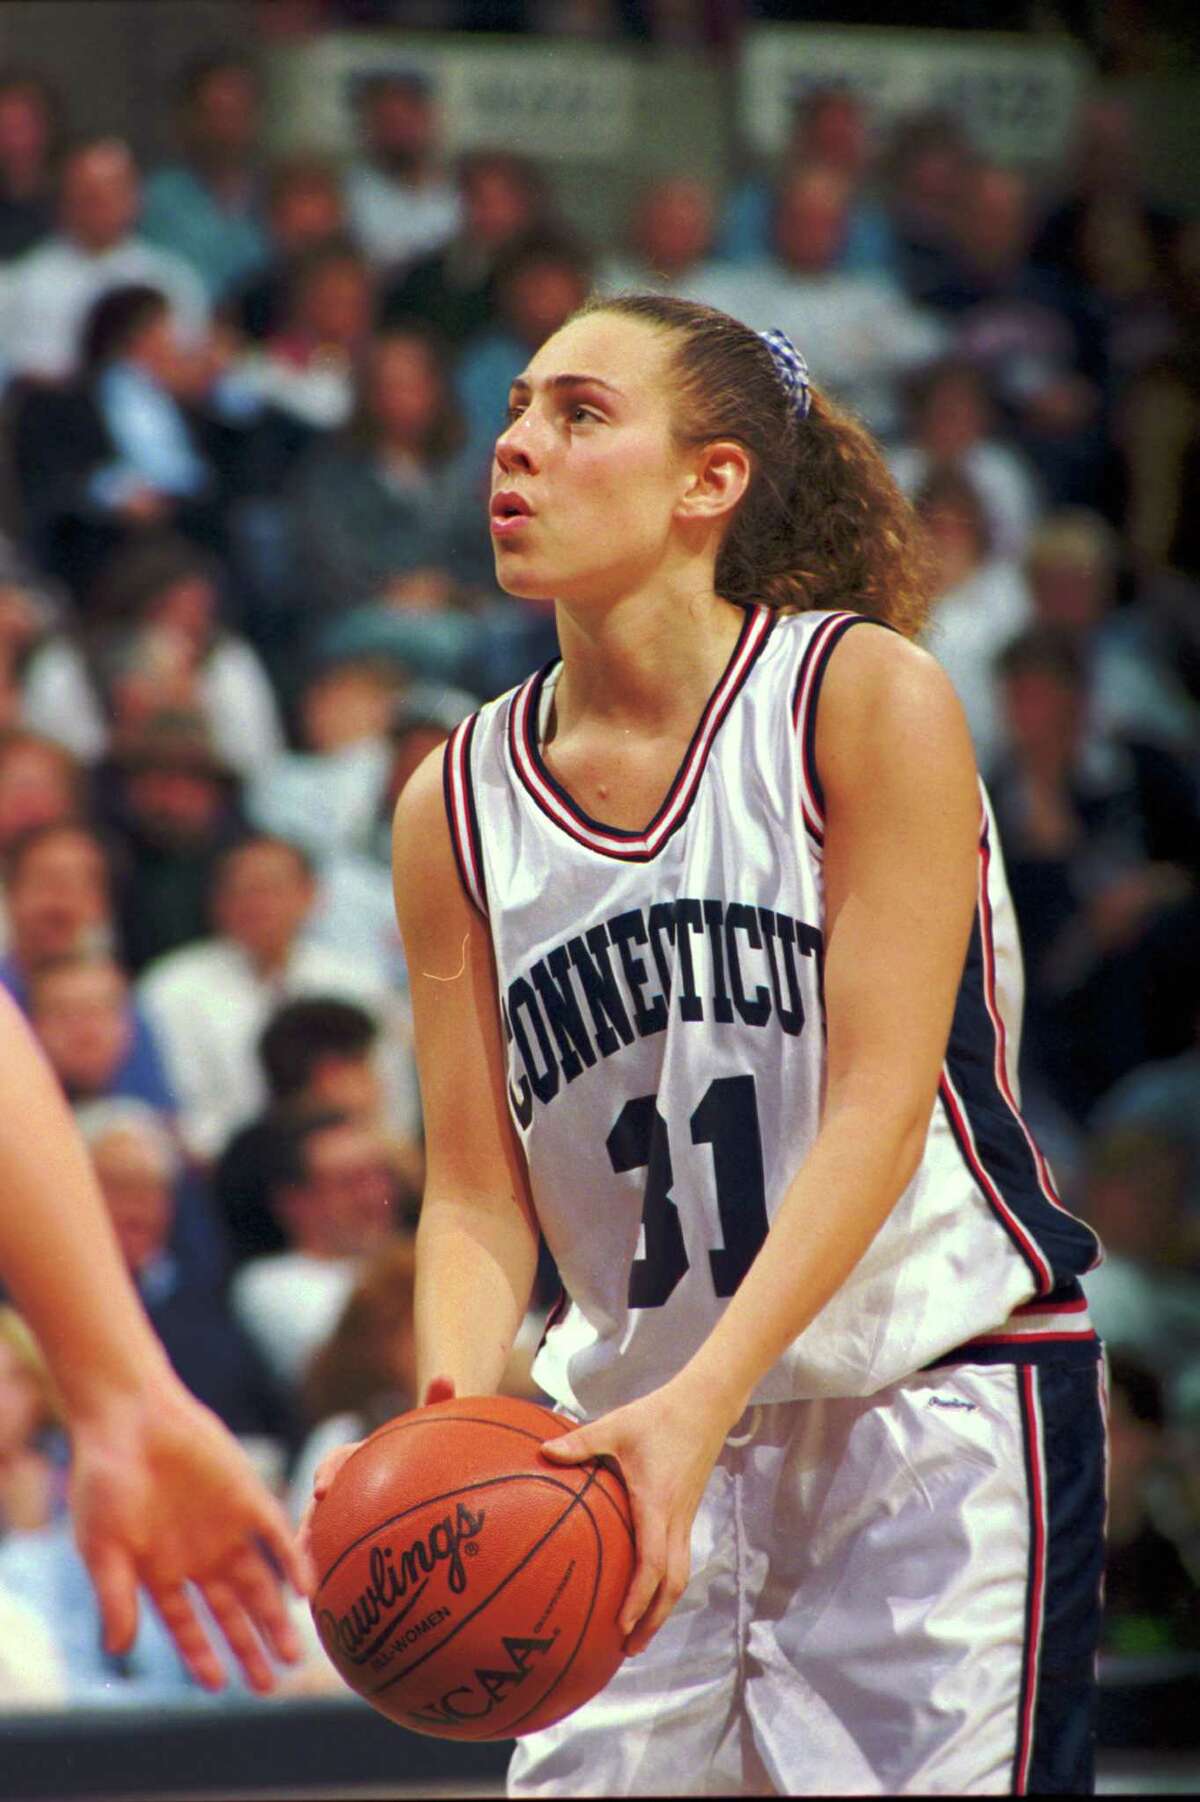 Carla Berube, forward for the University of Connecticut women's basketball team, shoots a foul shot during a game at Storrs, CT, 1997. (Photo by Bob Stowell/Getty Images)